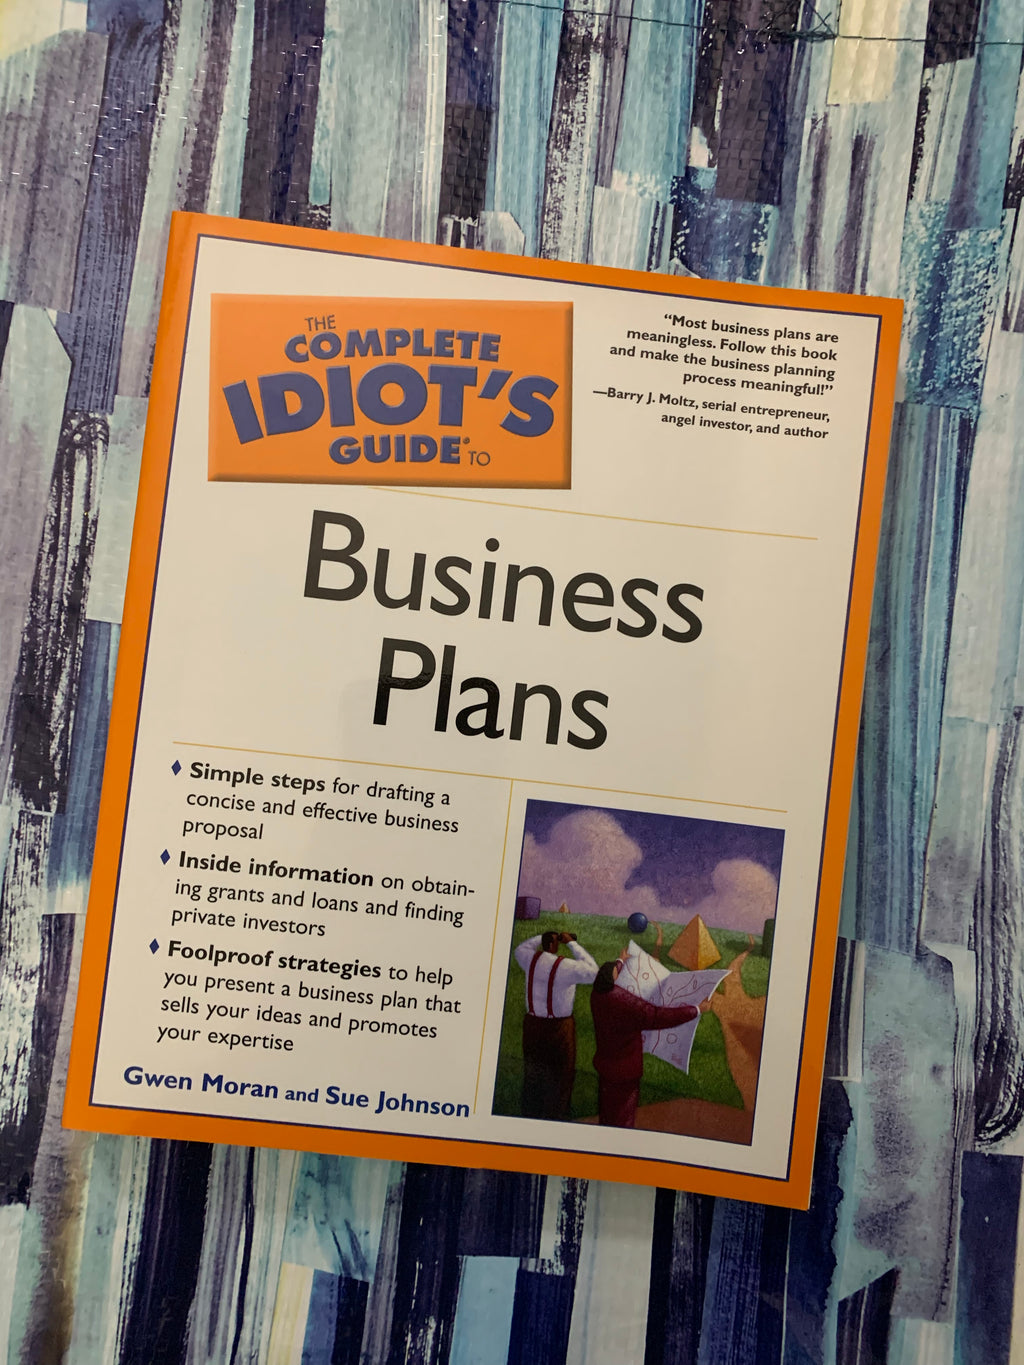 The Complete Idiot's Guide to: Business Plans- By Gwen Moran and Sue Johnson